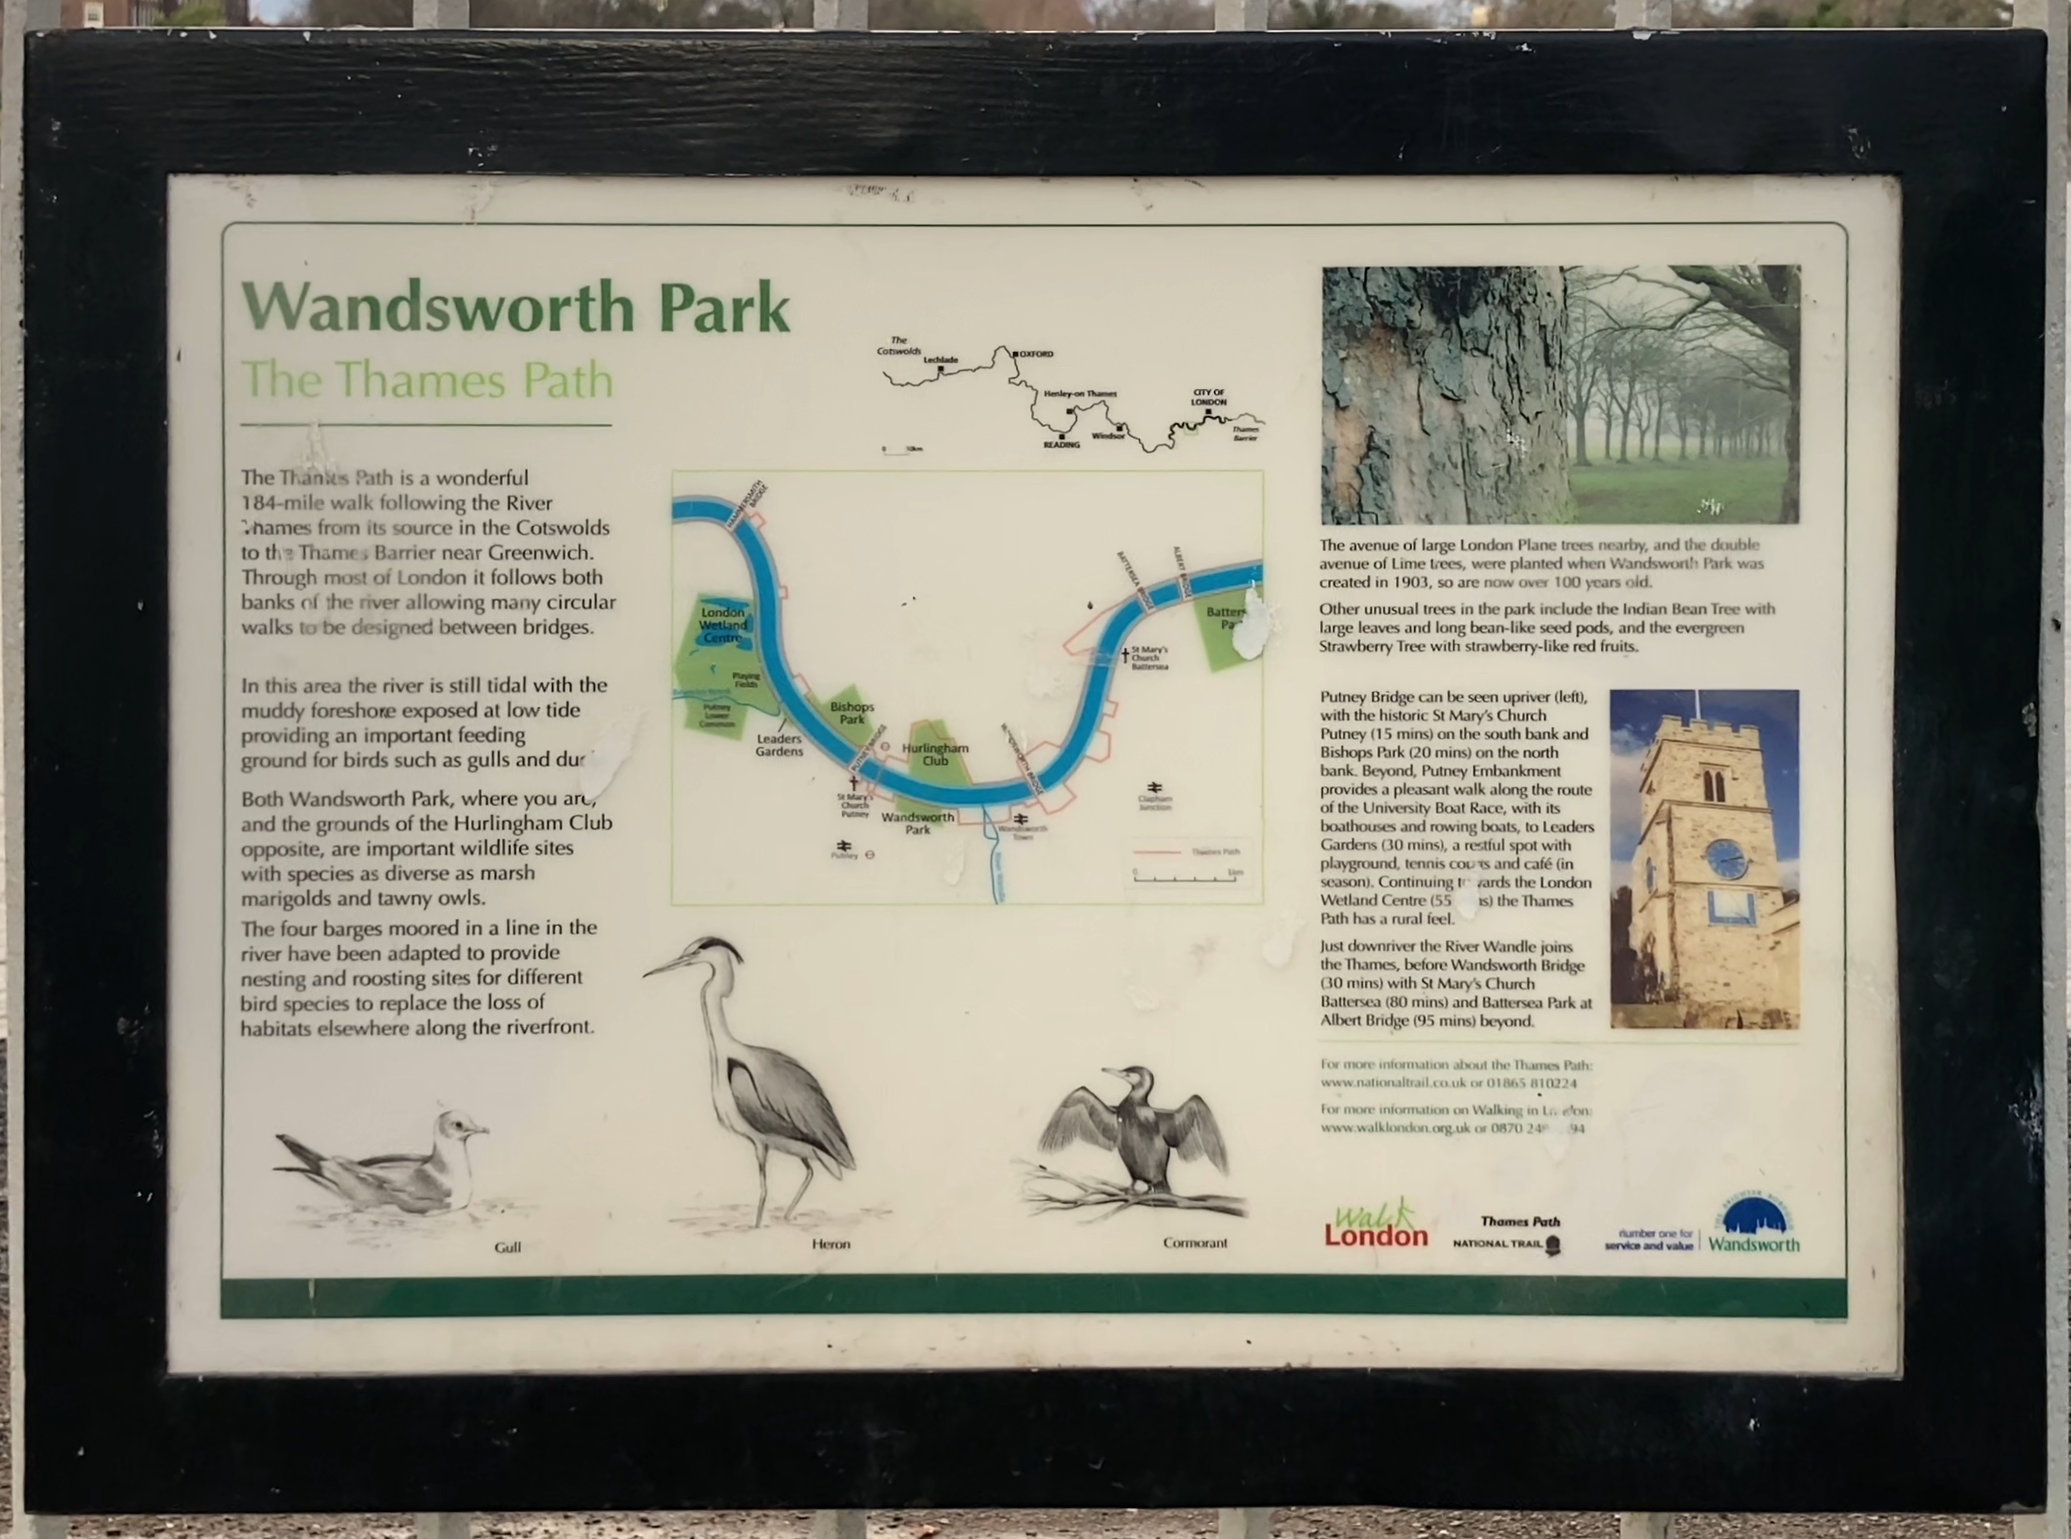 Wandsworth Park - The Thames Path